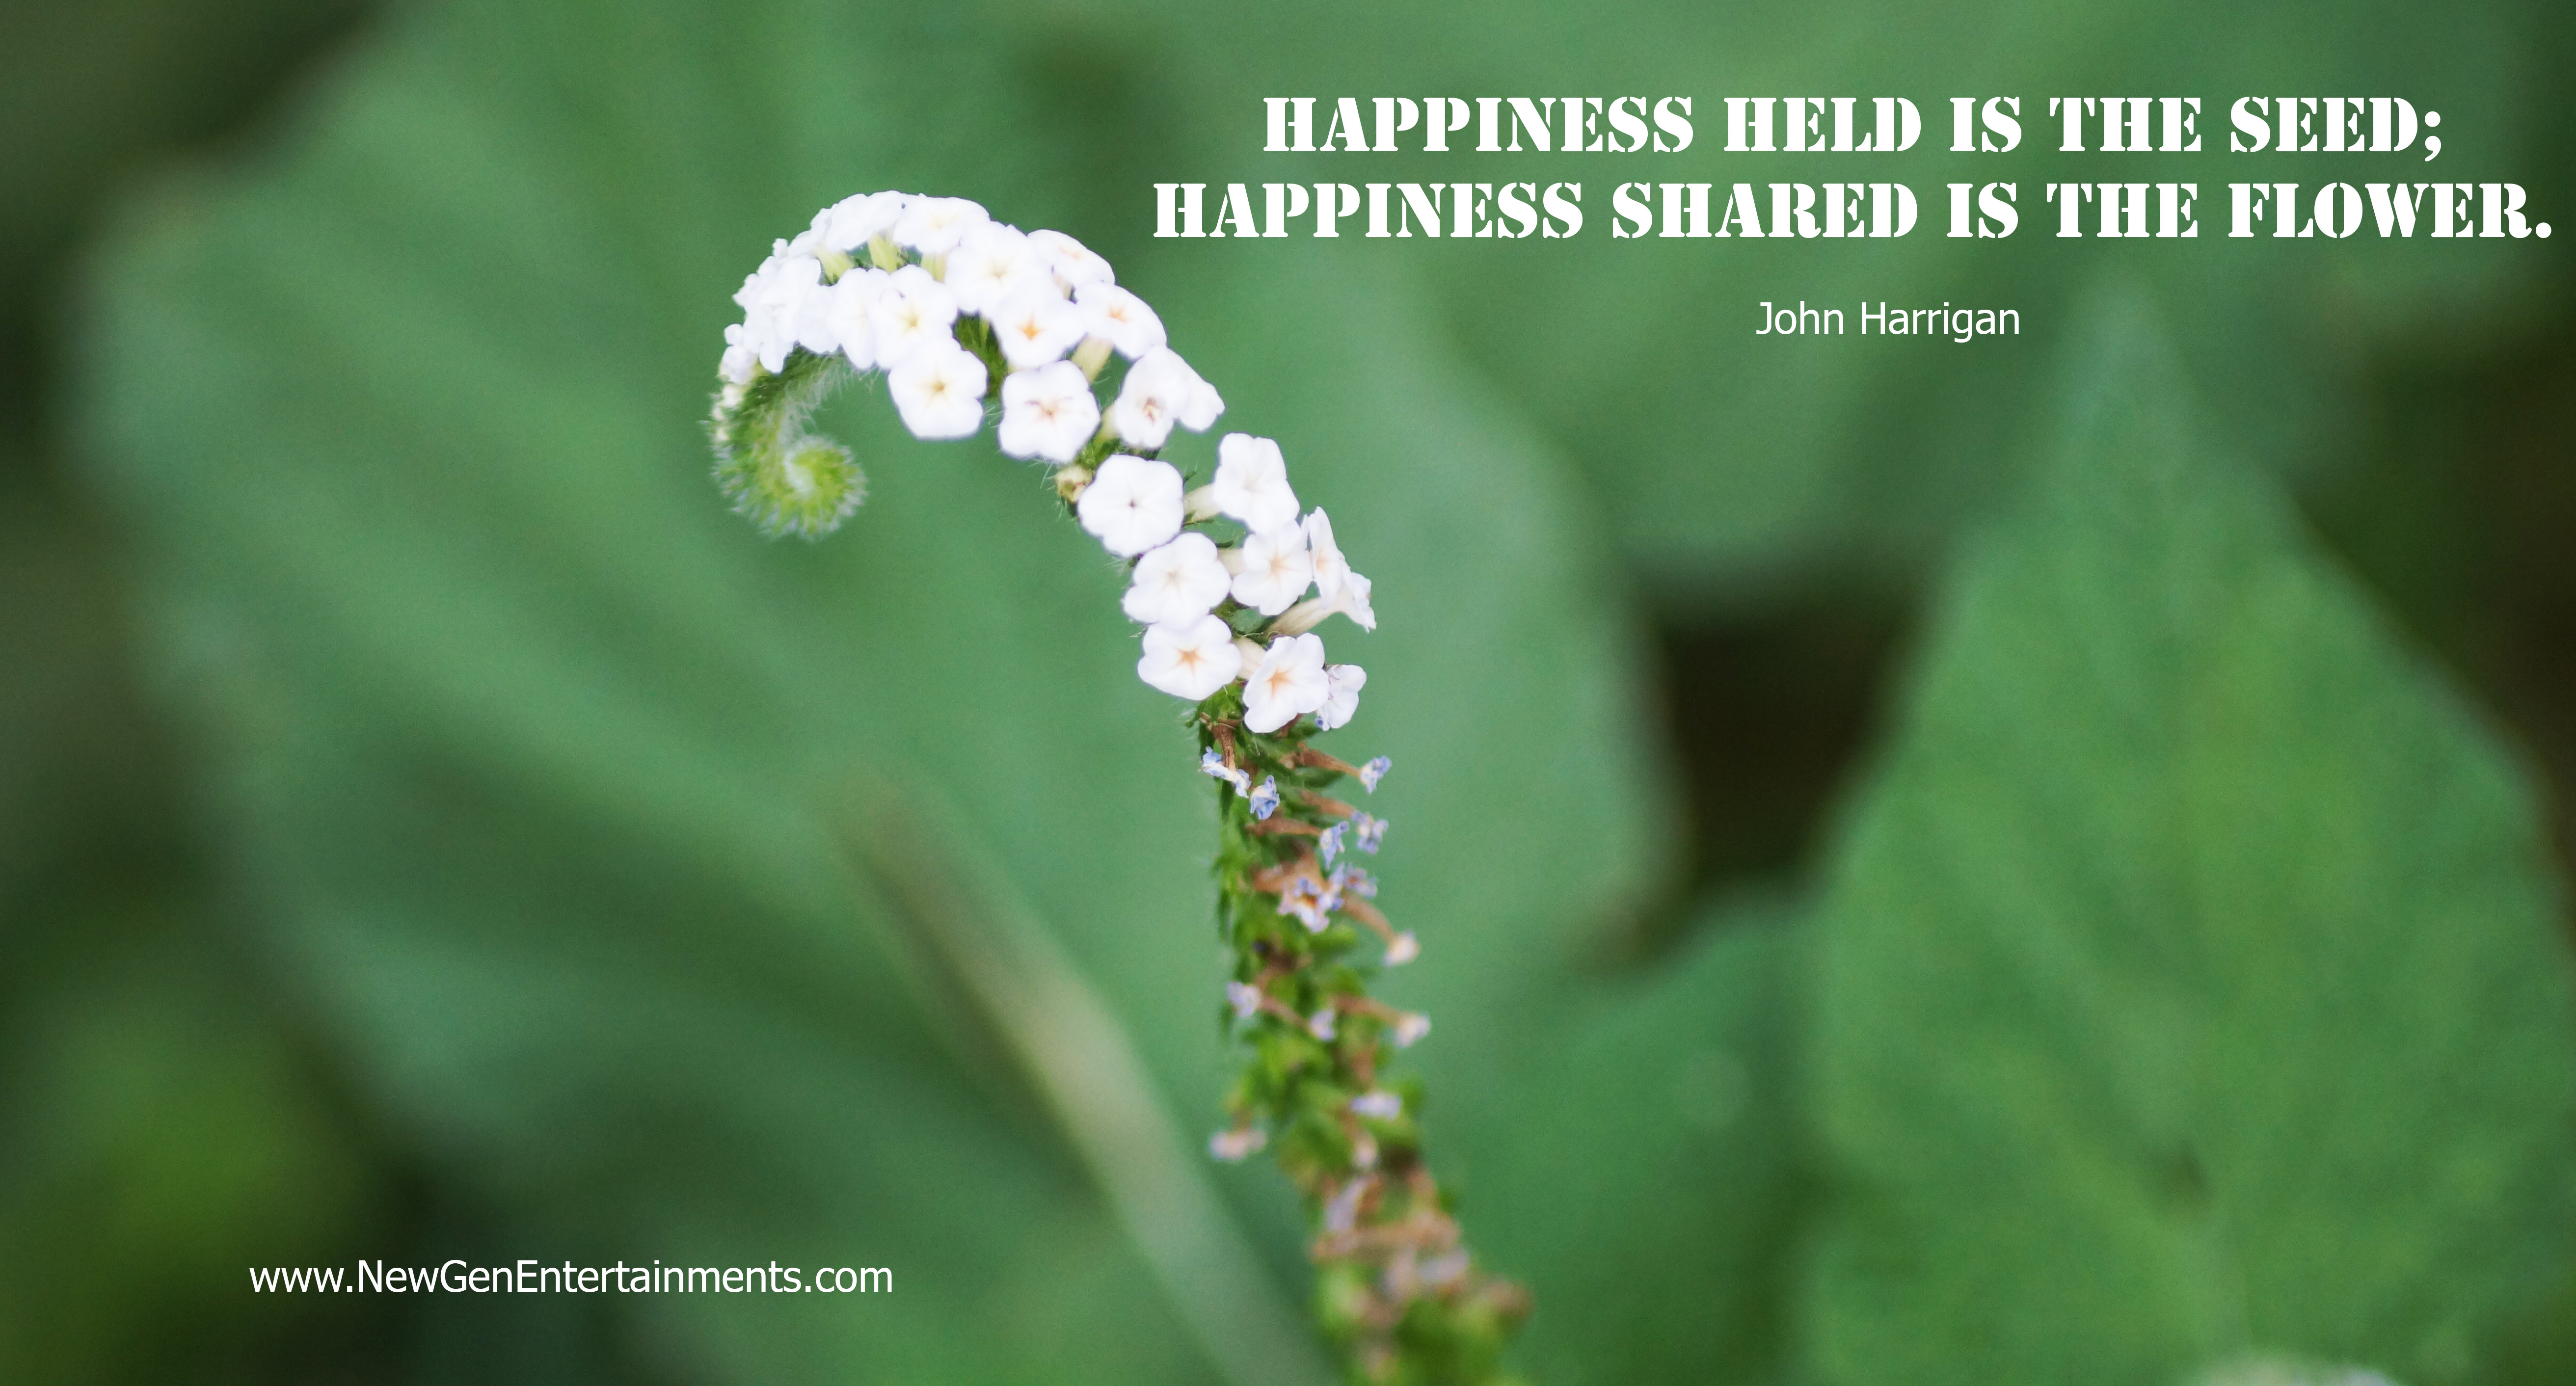 Happiness held is the seed; Happiness shared is the flower